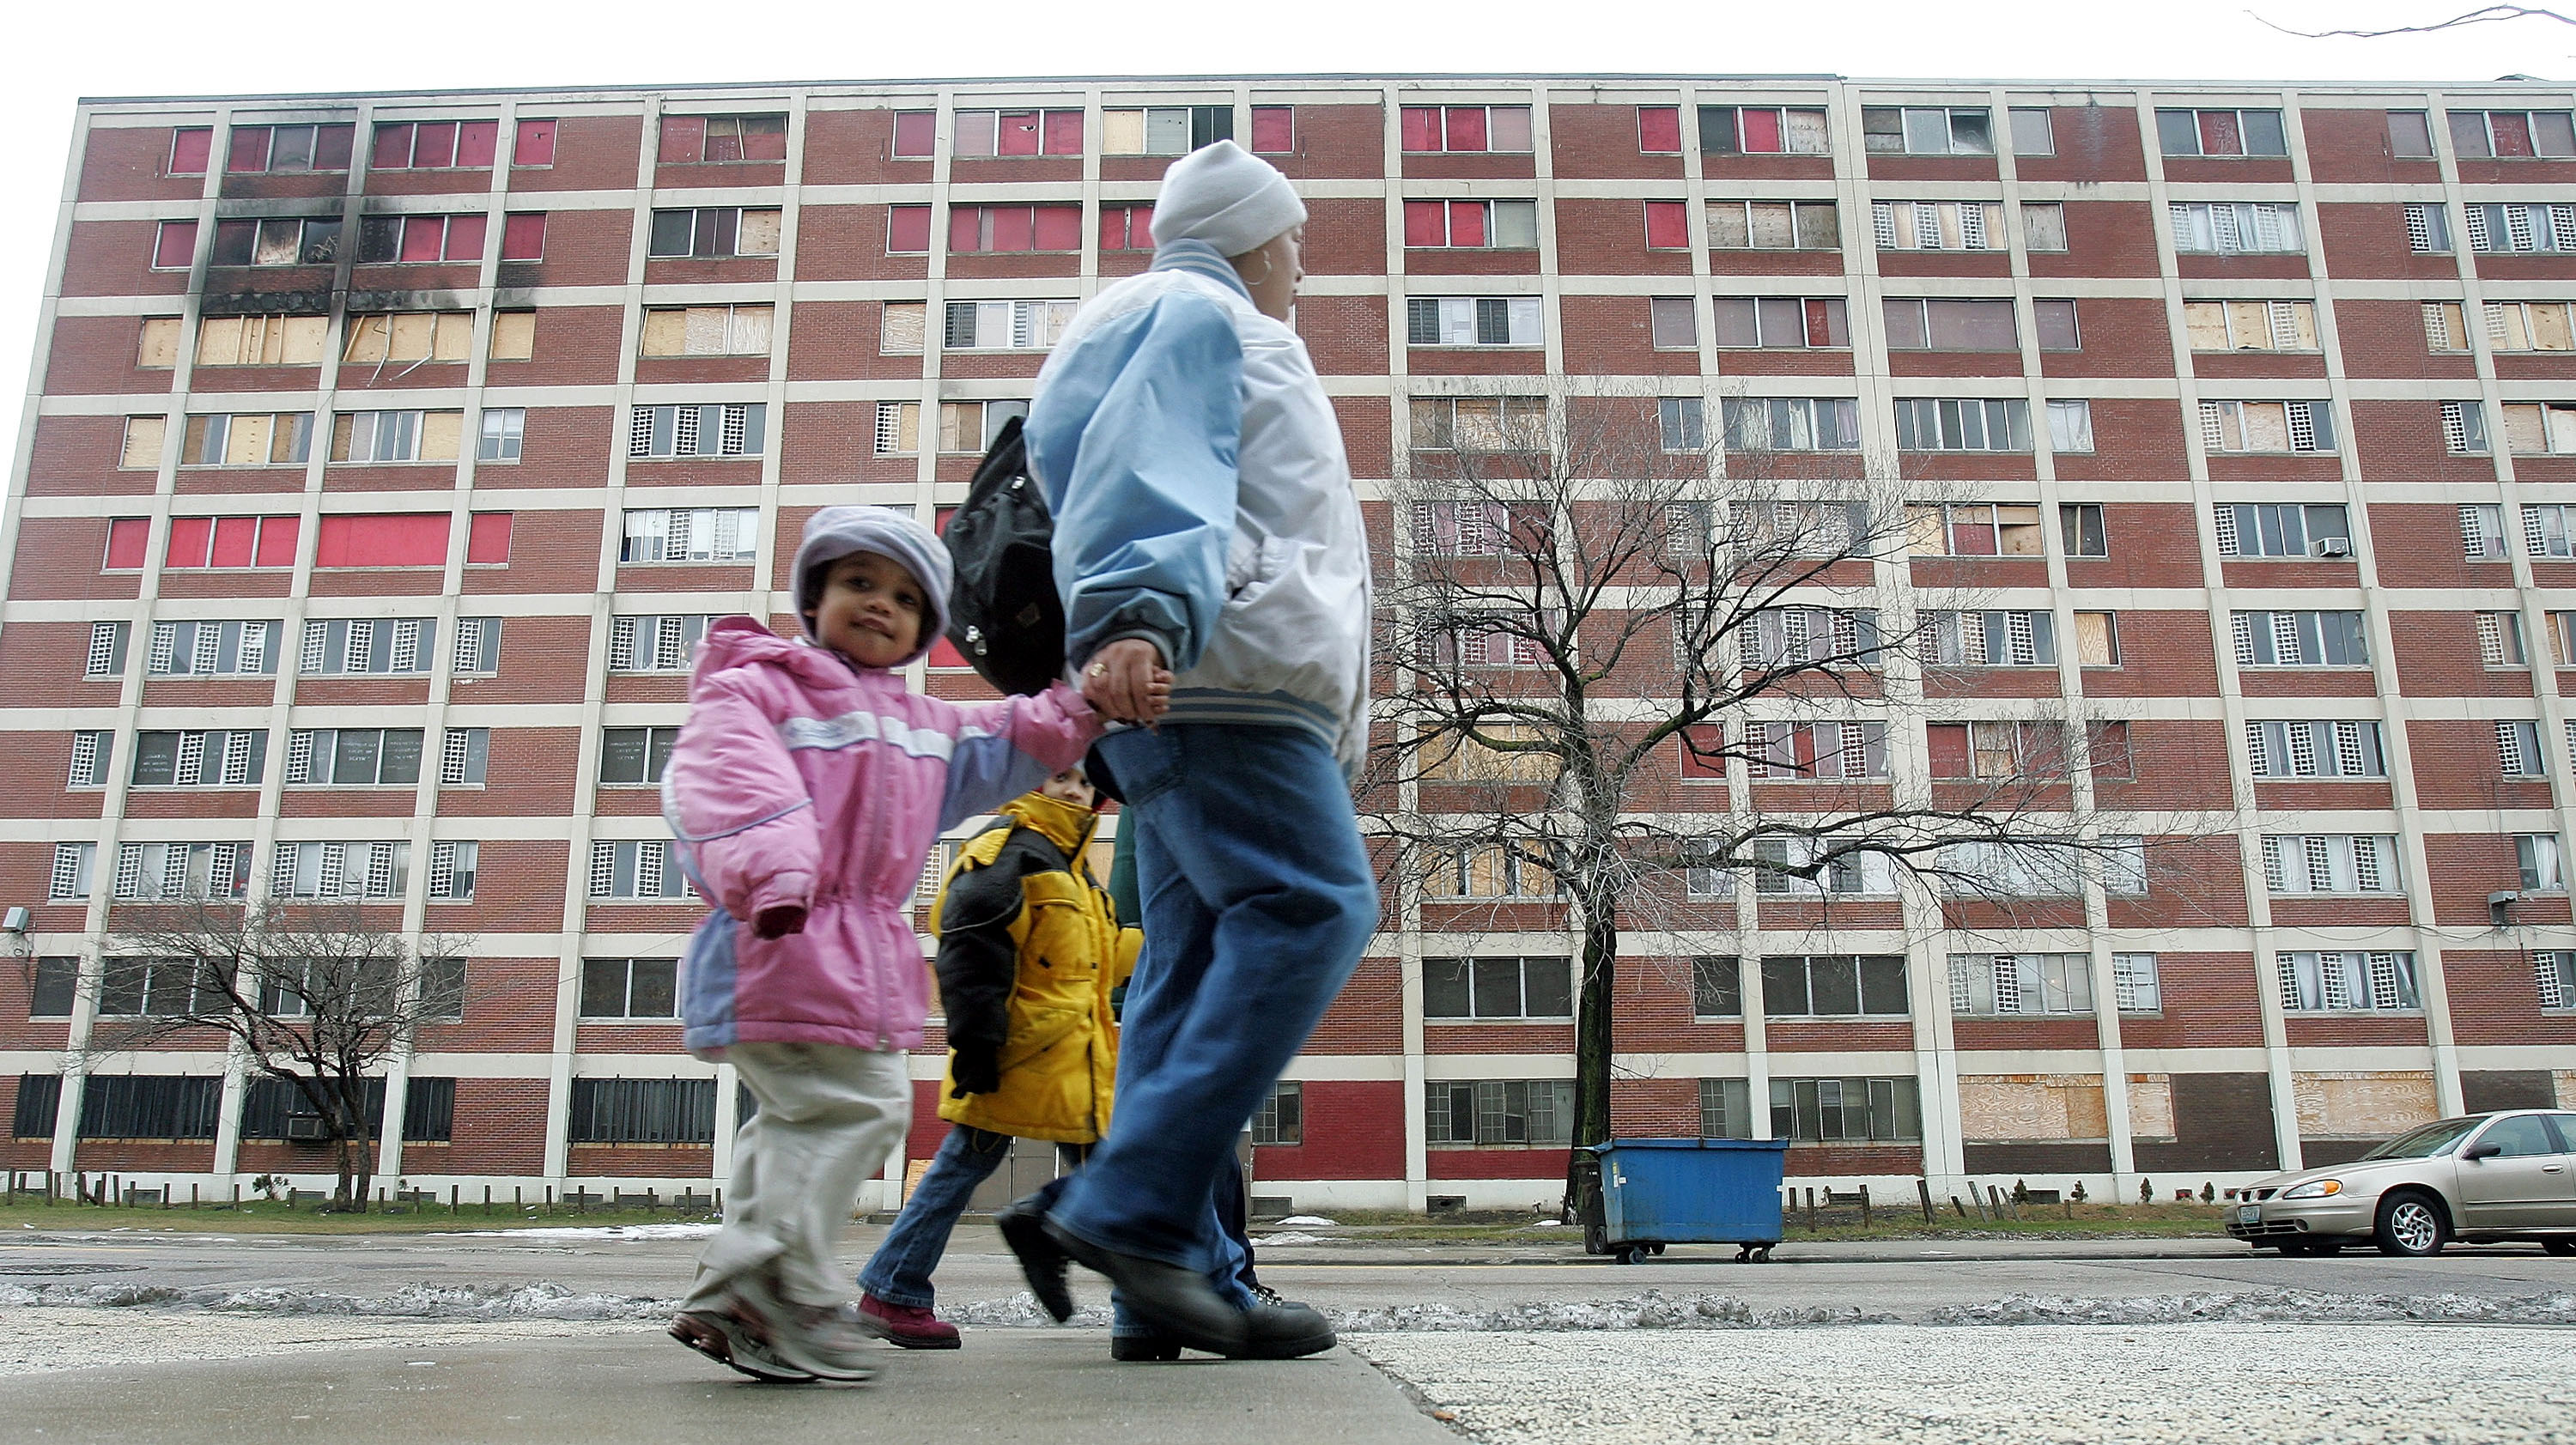 Residents walk past one of the few remaining Chicago Housing Authority Cabrini-Green public housing buildings in 2005. (Tim Boyle/Getty Images)